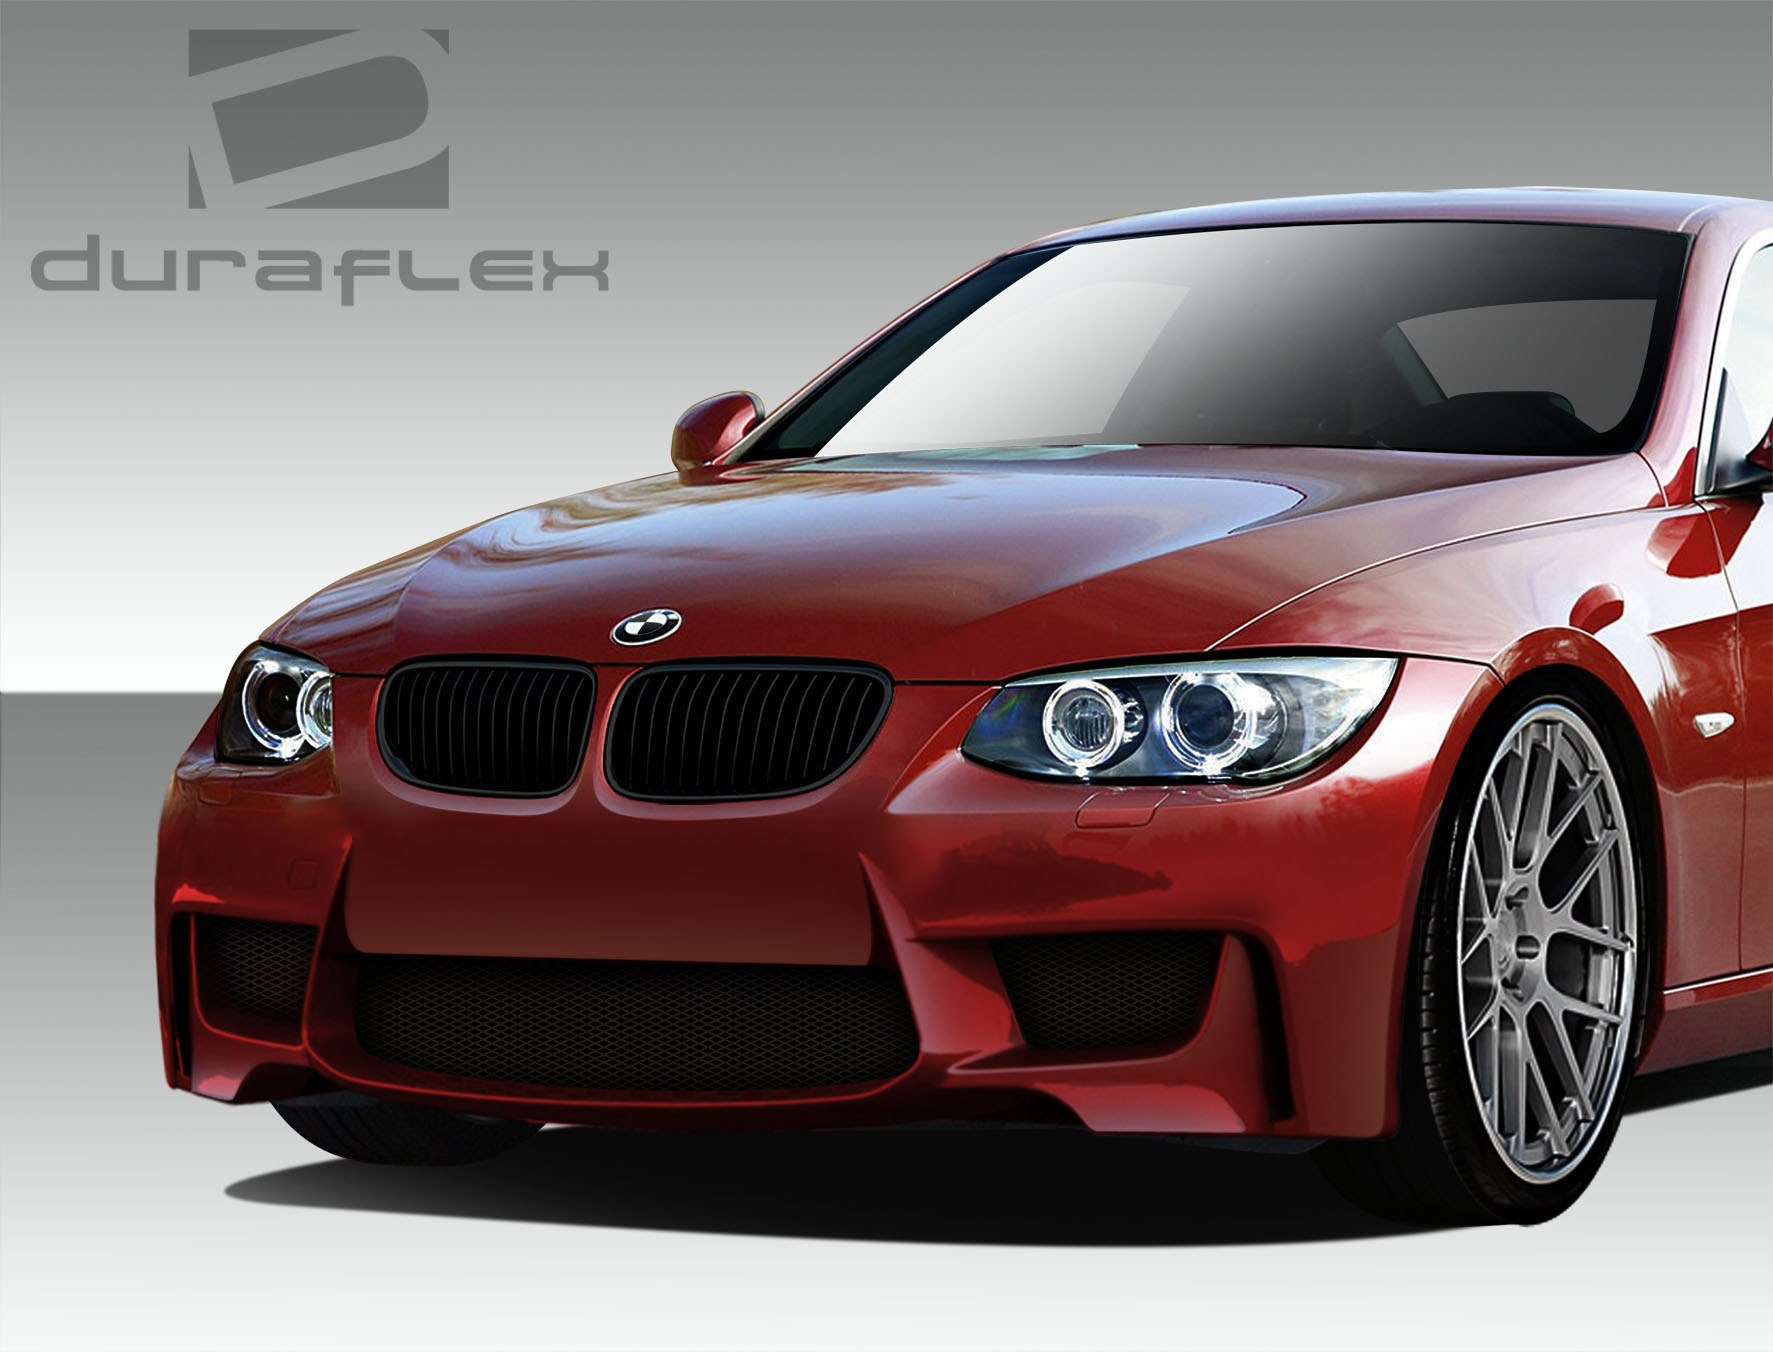 1 Piece Extreme Dimensions Duraflex Replacement for 2011-2013 BMW 3 Series E92 2dr E93 Convertible M3 Look Front Bumper Cover 